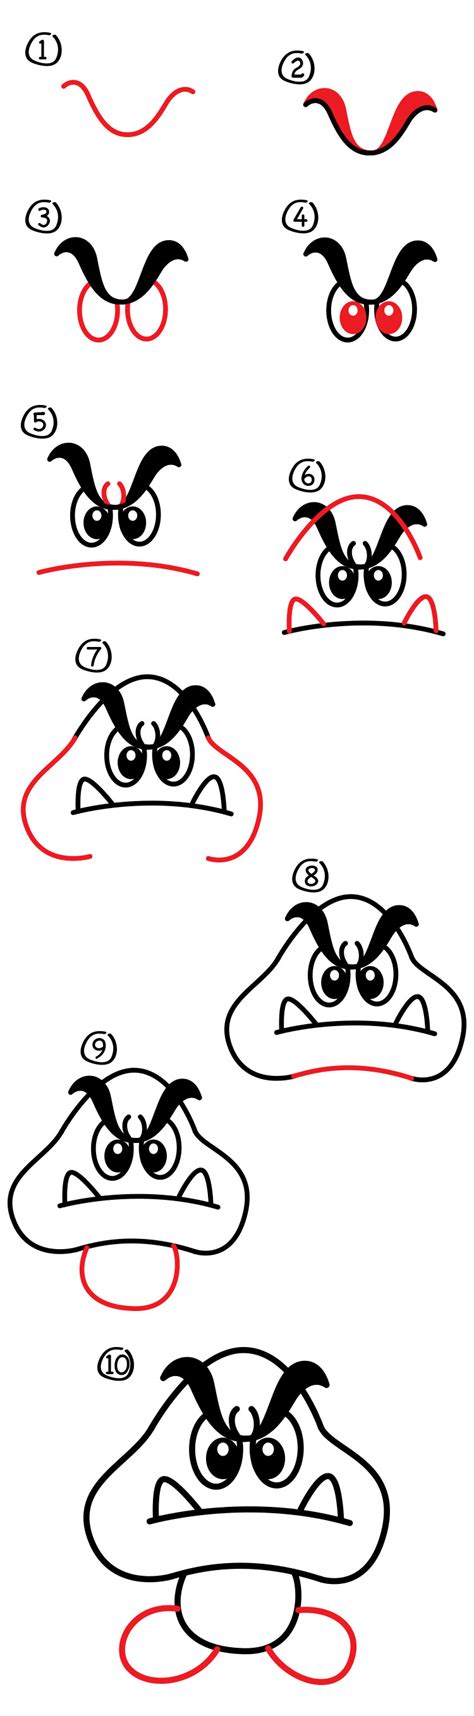 How To Draw A Goomba From Mario Bros Art For Kids Hub